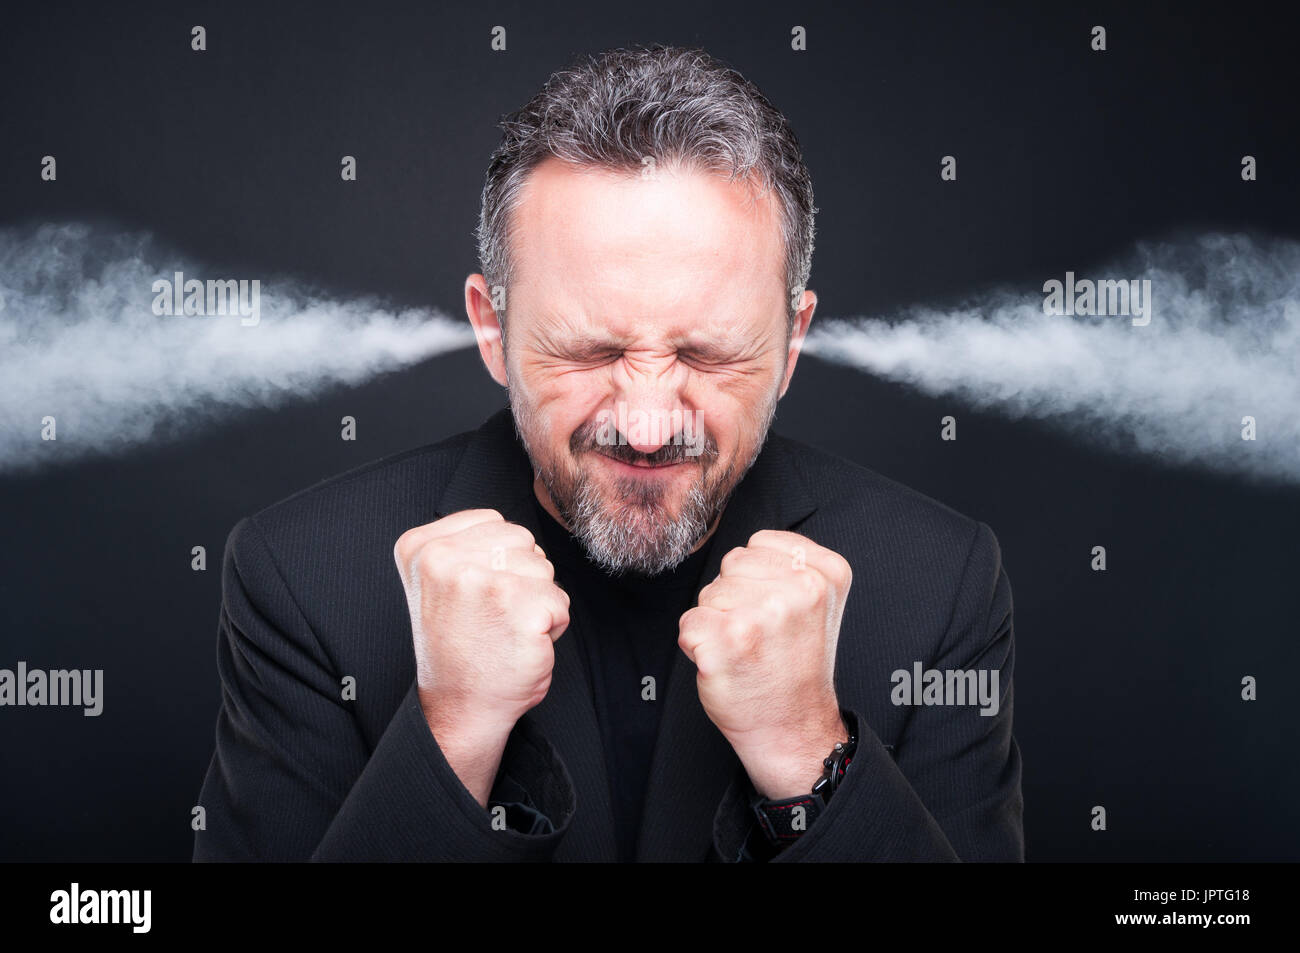 Angry frustrated man with exploding head and steam coming out of his ears on dark background Stock Photo